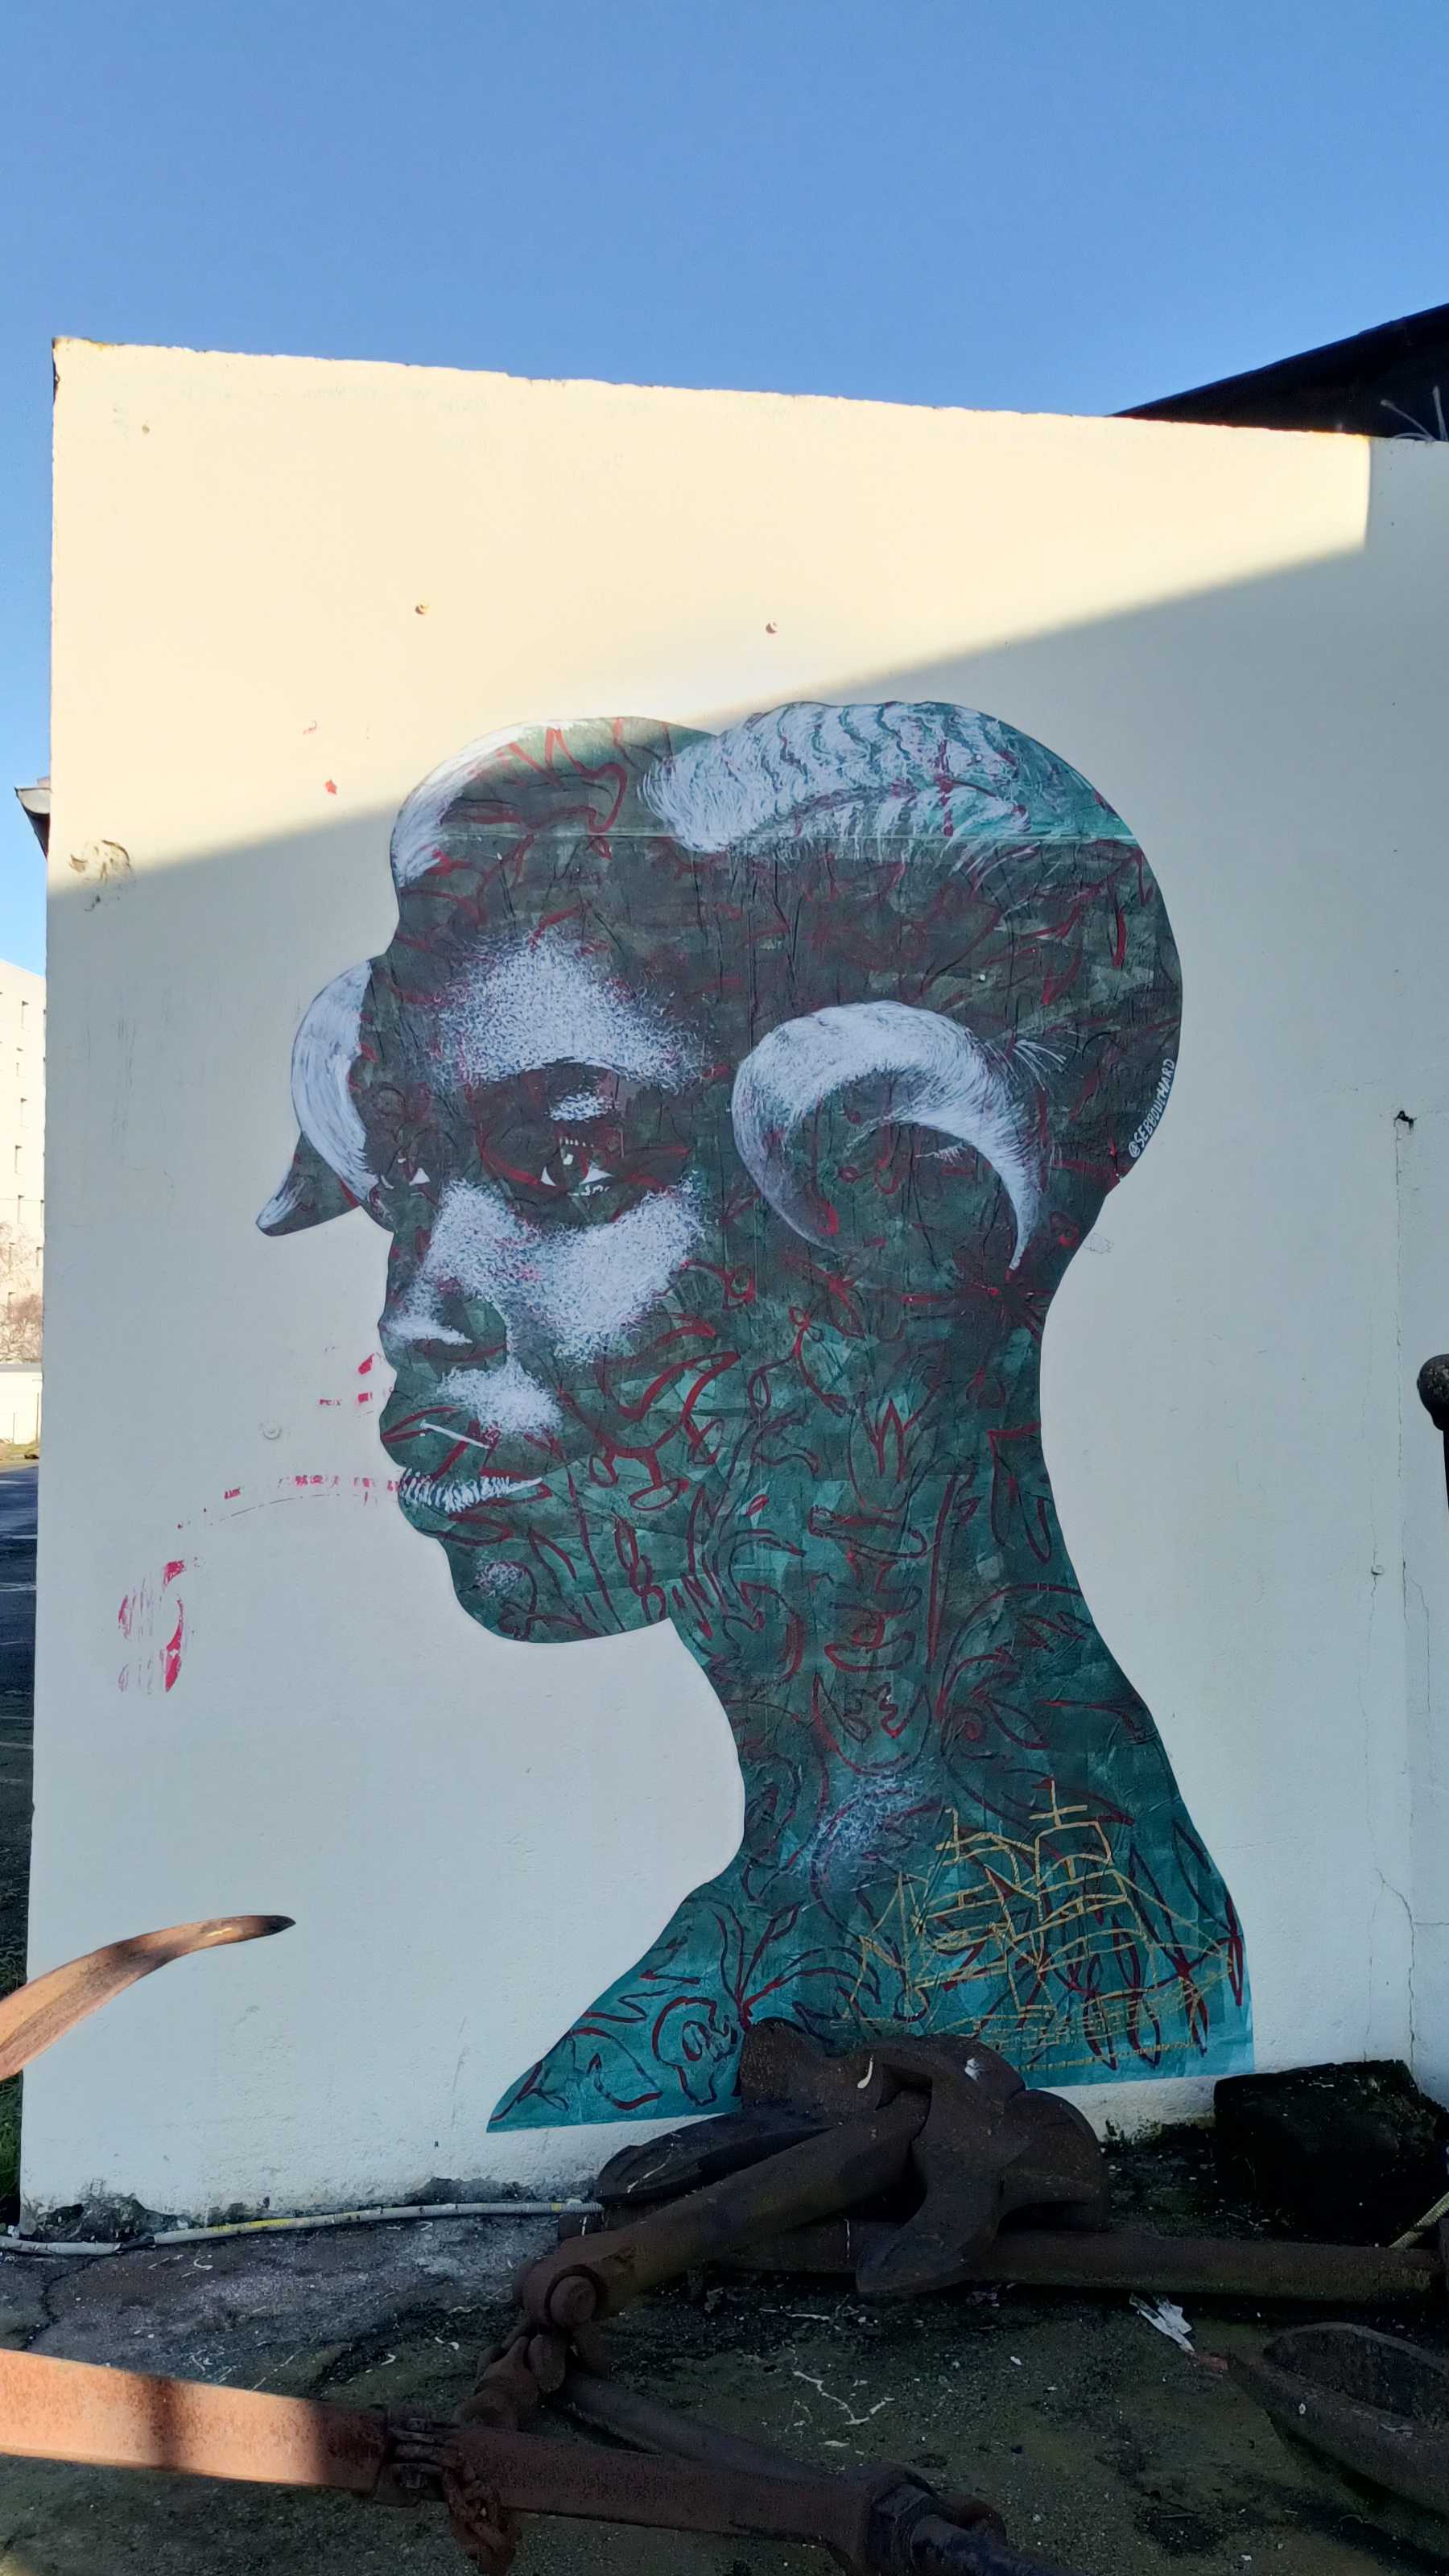 Sticking 6181  by the artist Seb Bouchard captured by Rabot in Nantes France